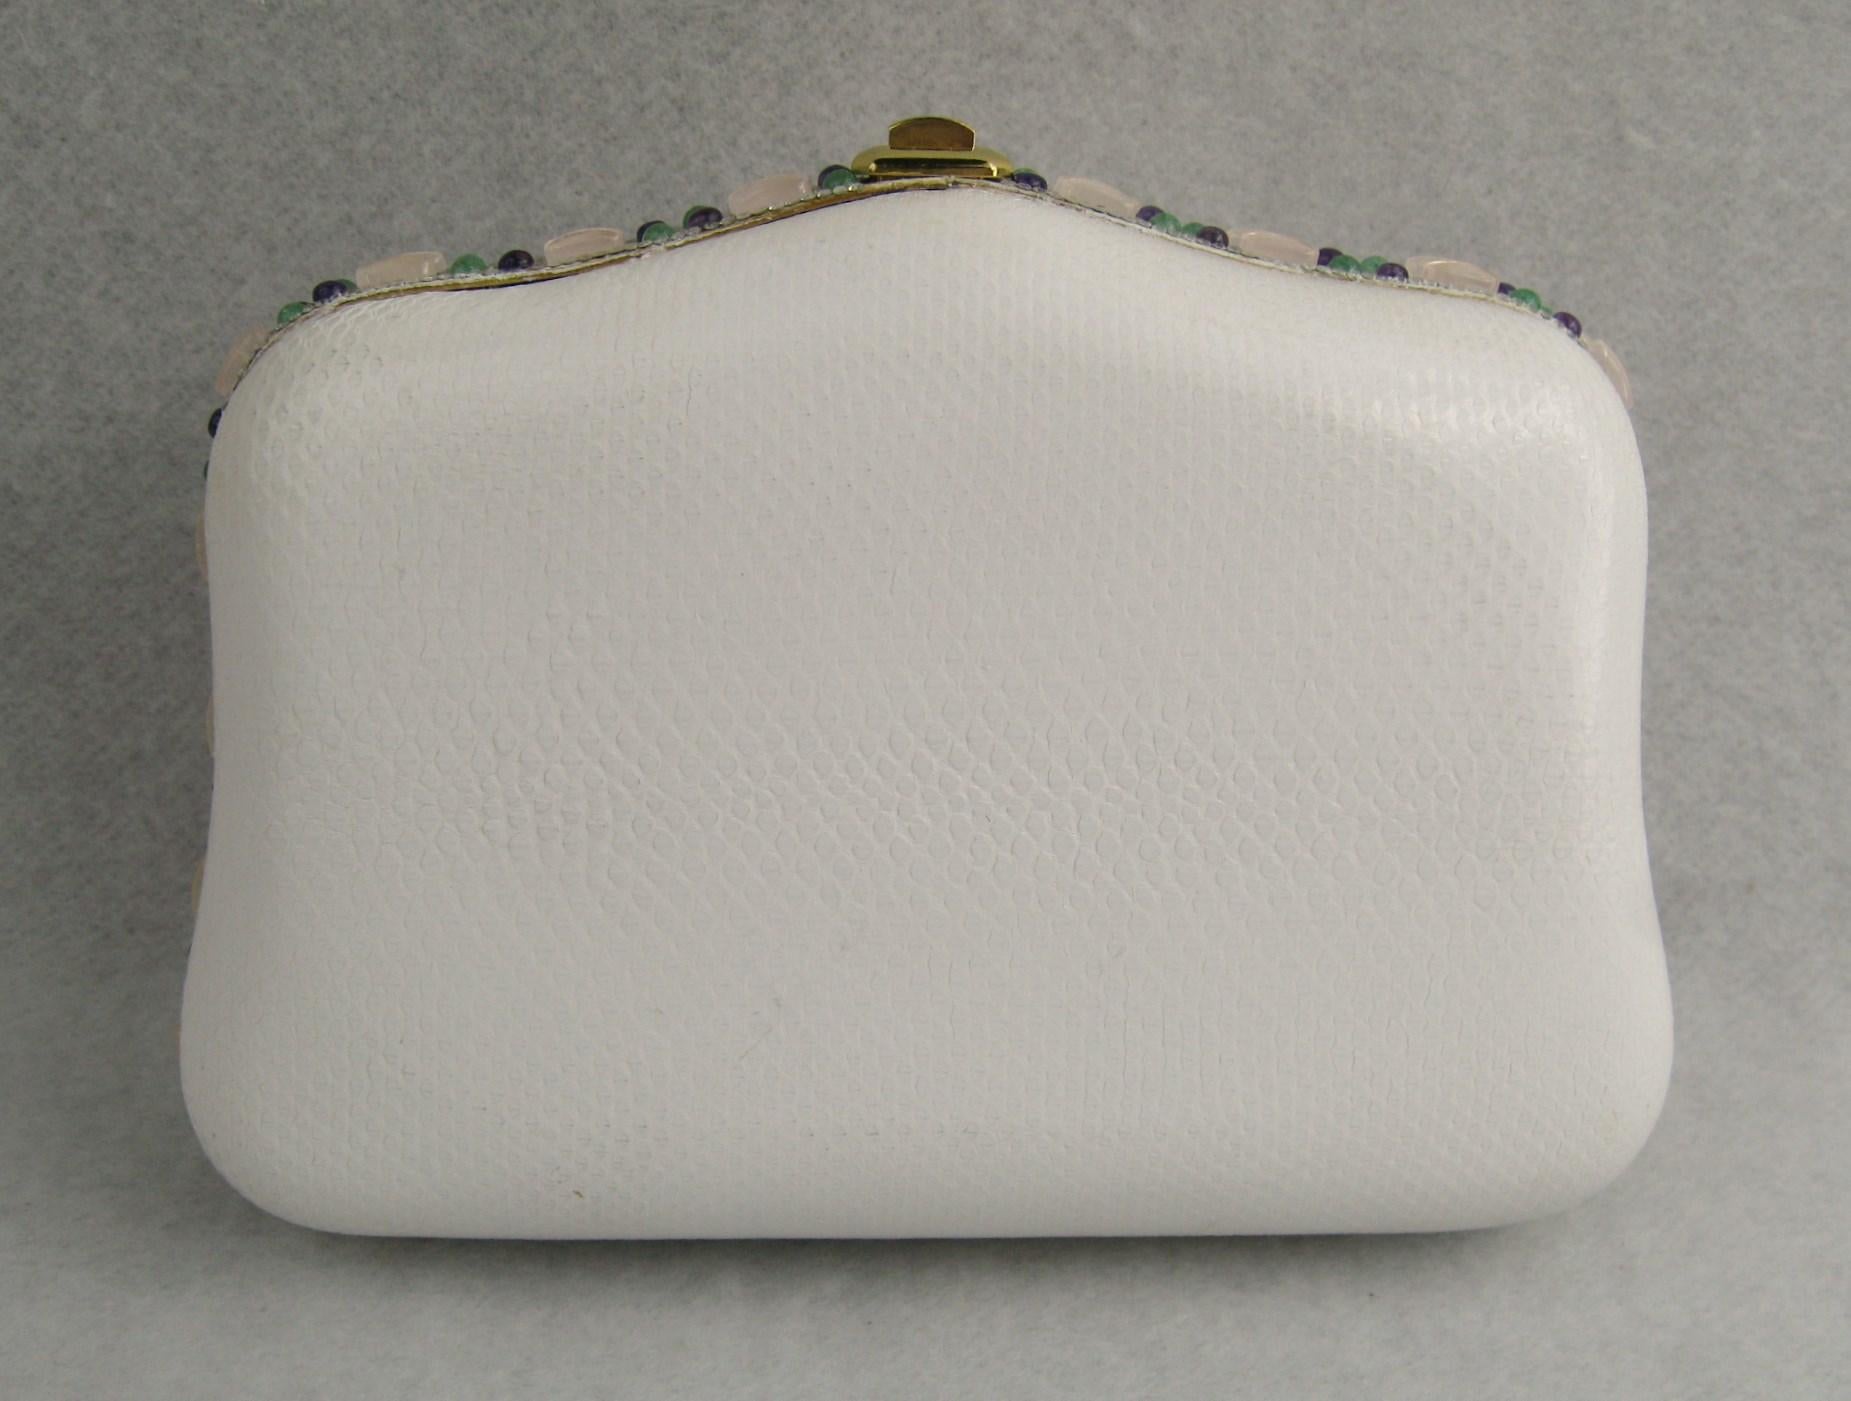 Wonderful Judith Leiber clutch! Totally surrounded by semi-precious stones. Converts from a clutch to a shoulder bag. Gently, gently used. Mirror in bag. Measures 7.25 in x 5 in. x 2.25 in. deep. It comes with an Original Judith Leiber Box it was